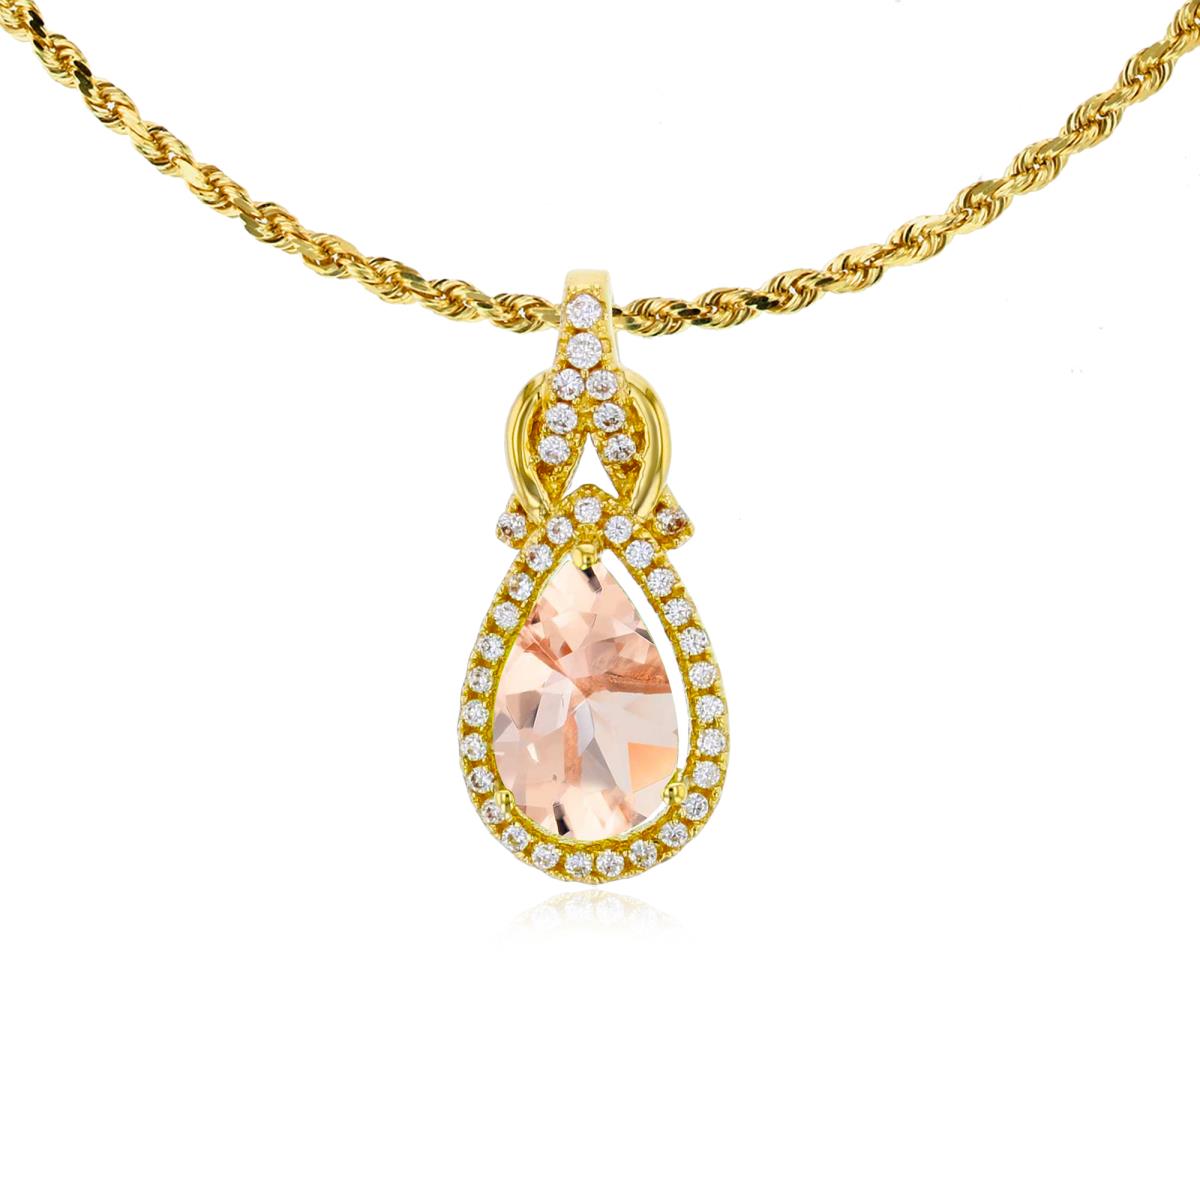 10K Yellow Gold 8x5mm Pear Cut Morganite & 0.11 CTTW Rnd Diamond Knot 18" Rope Chain Necklace